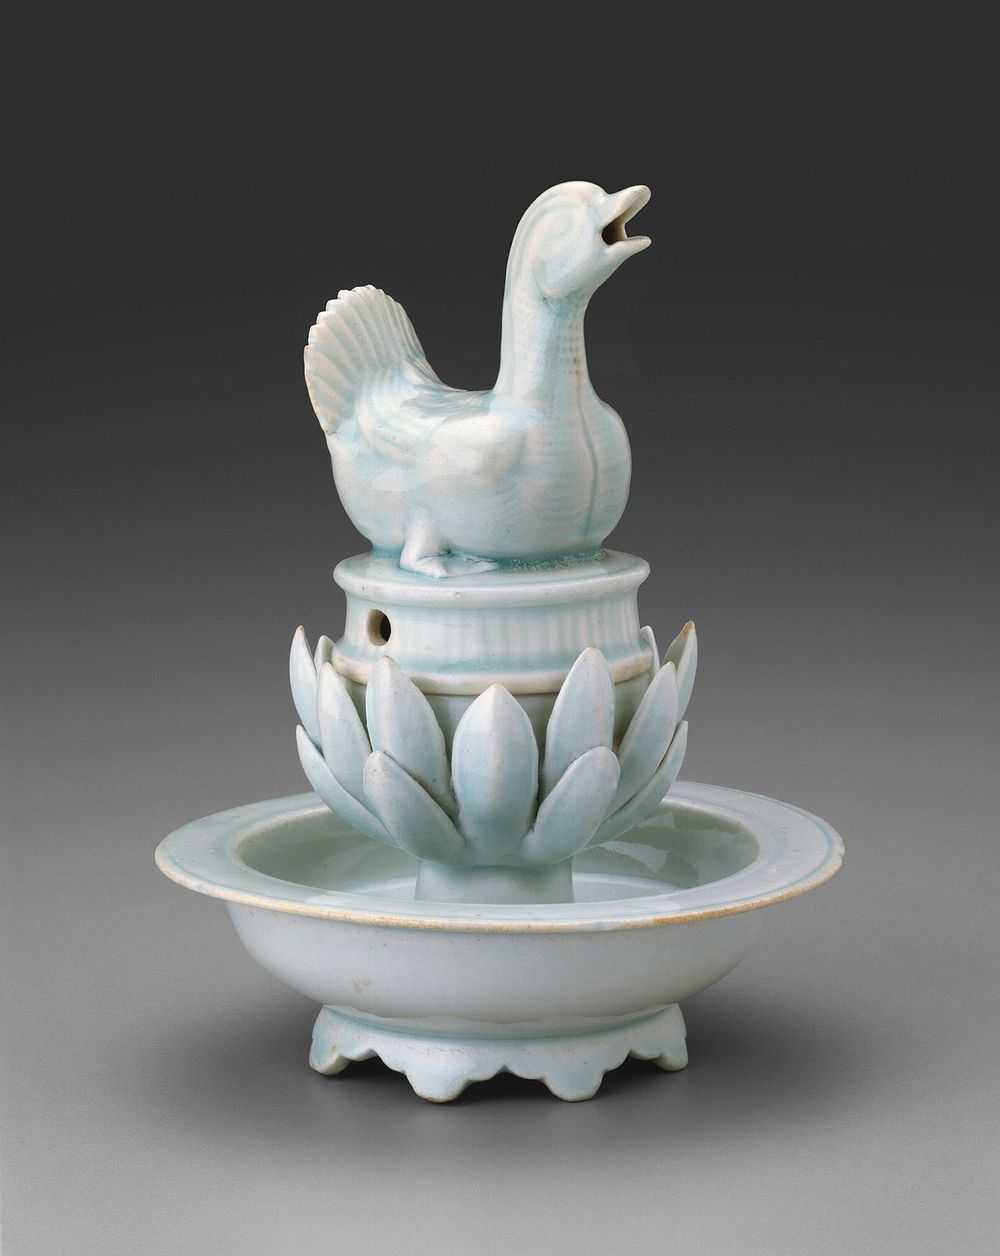 Incense Burner in the Form of a Duck